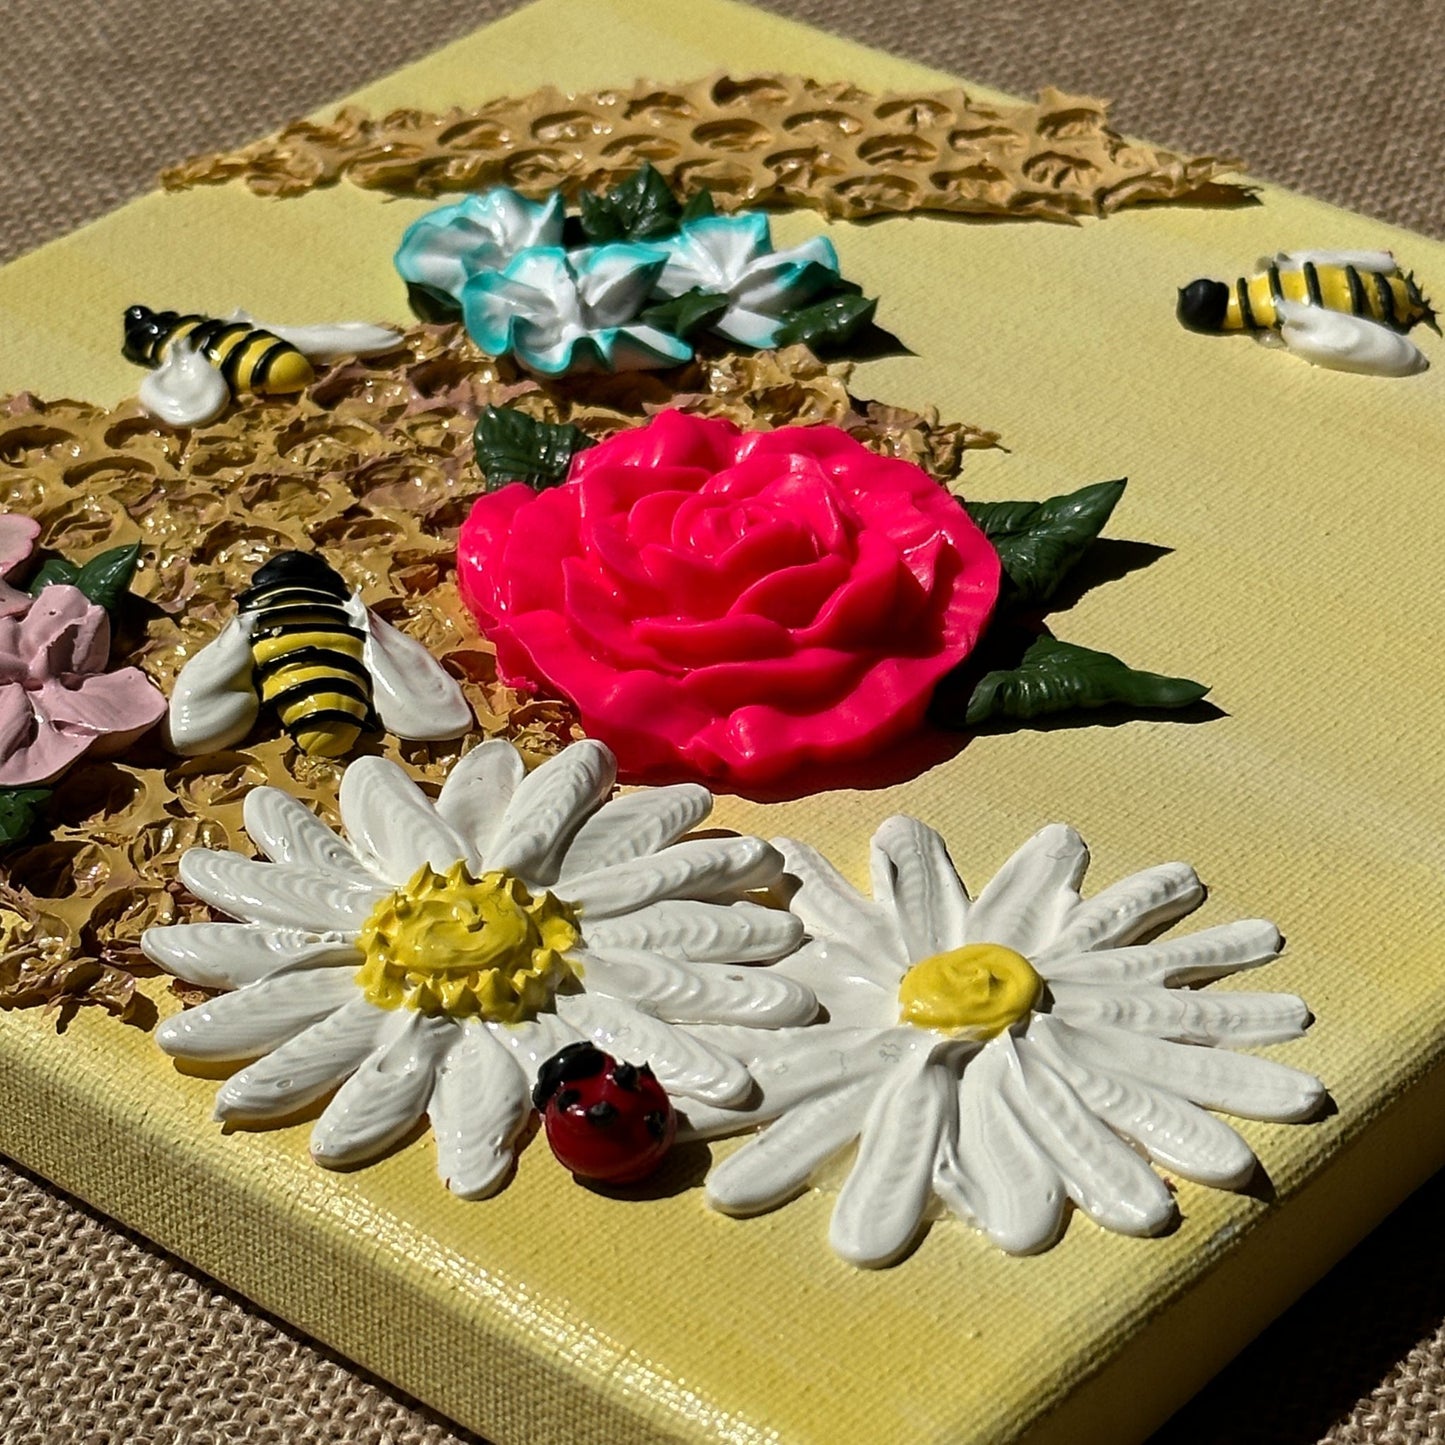 3D Bees and Multicolored Flowers on Yellow Canvas 8"x8"